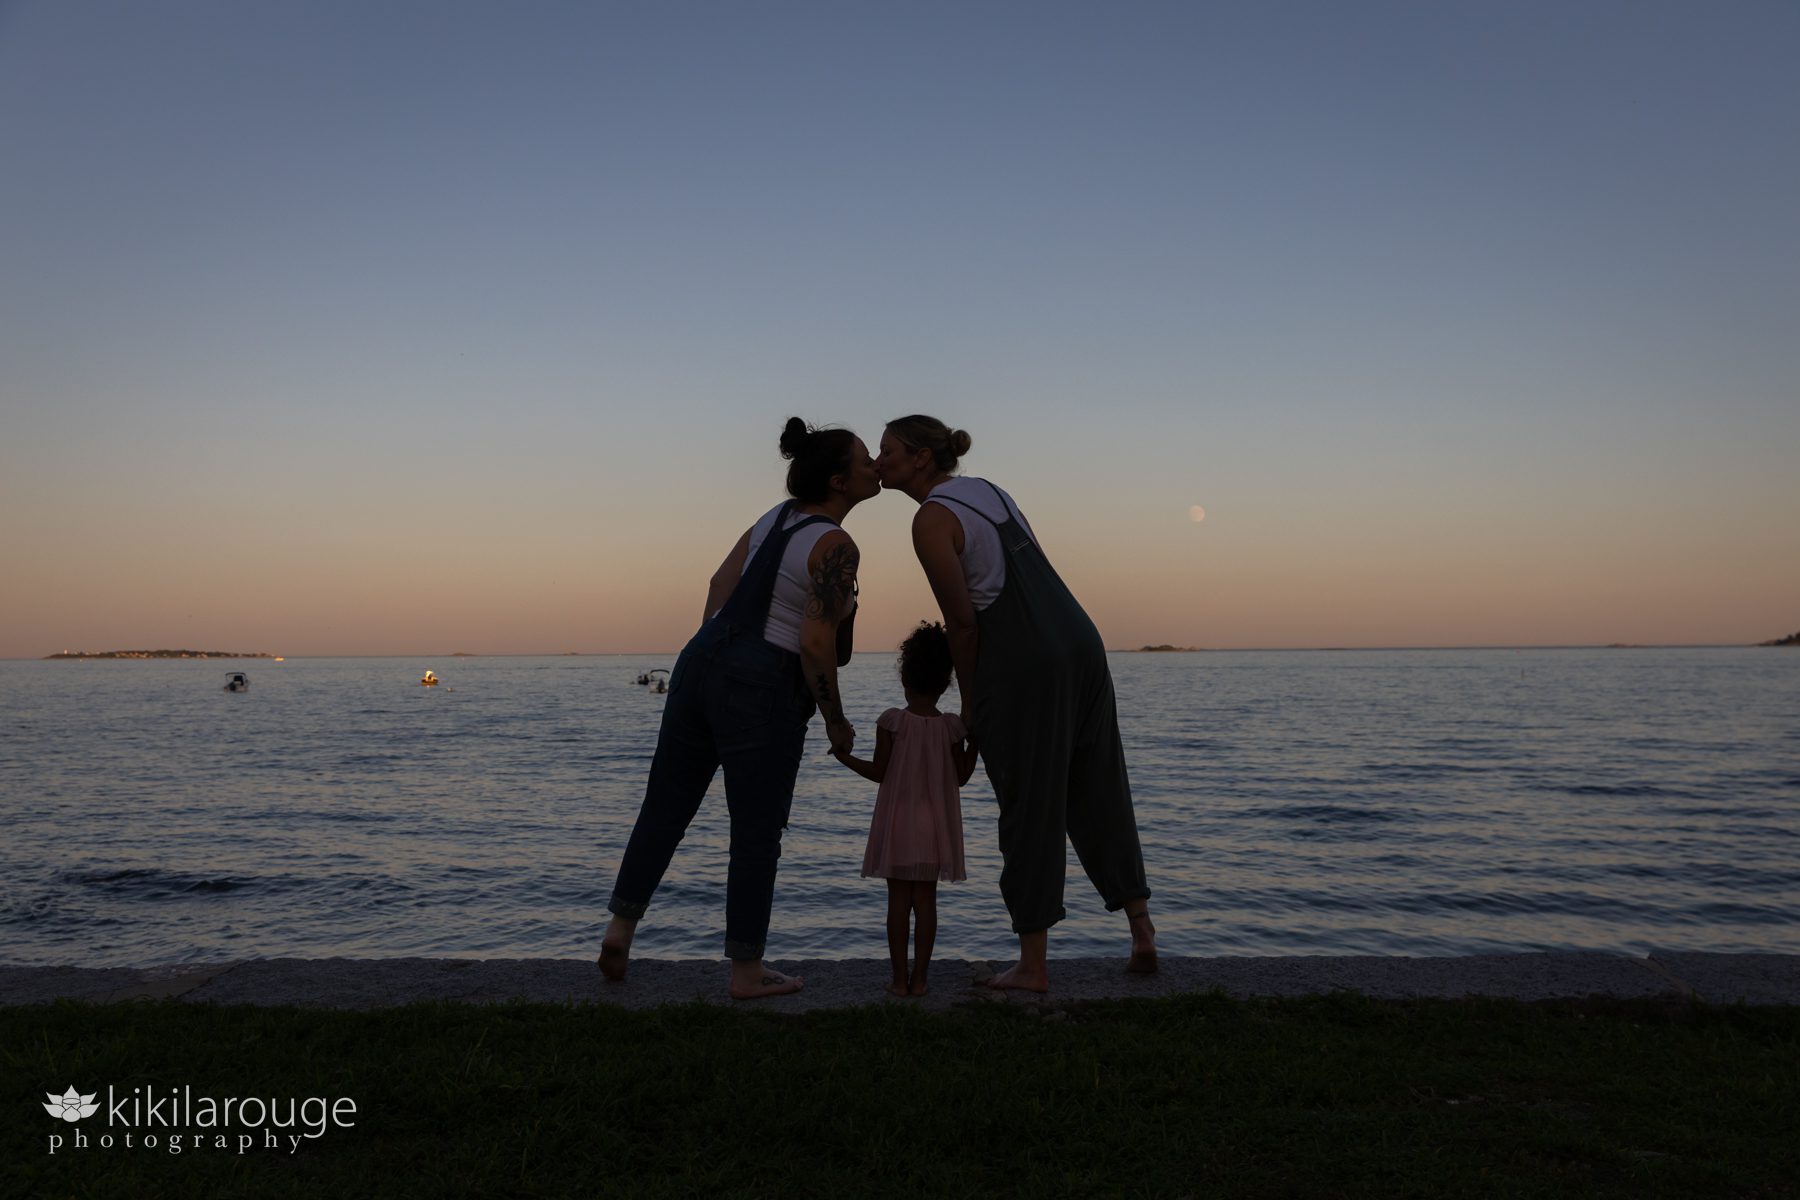 Couple kissing at sunset holding had of their daughter in silhouette